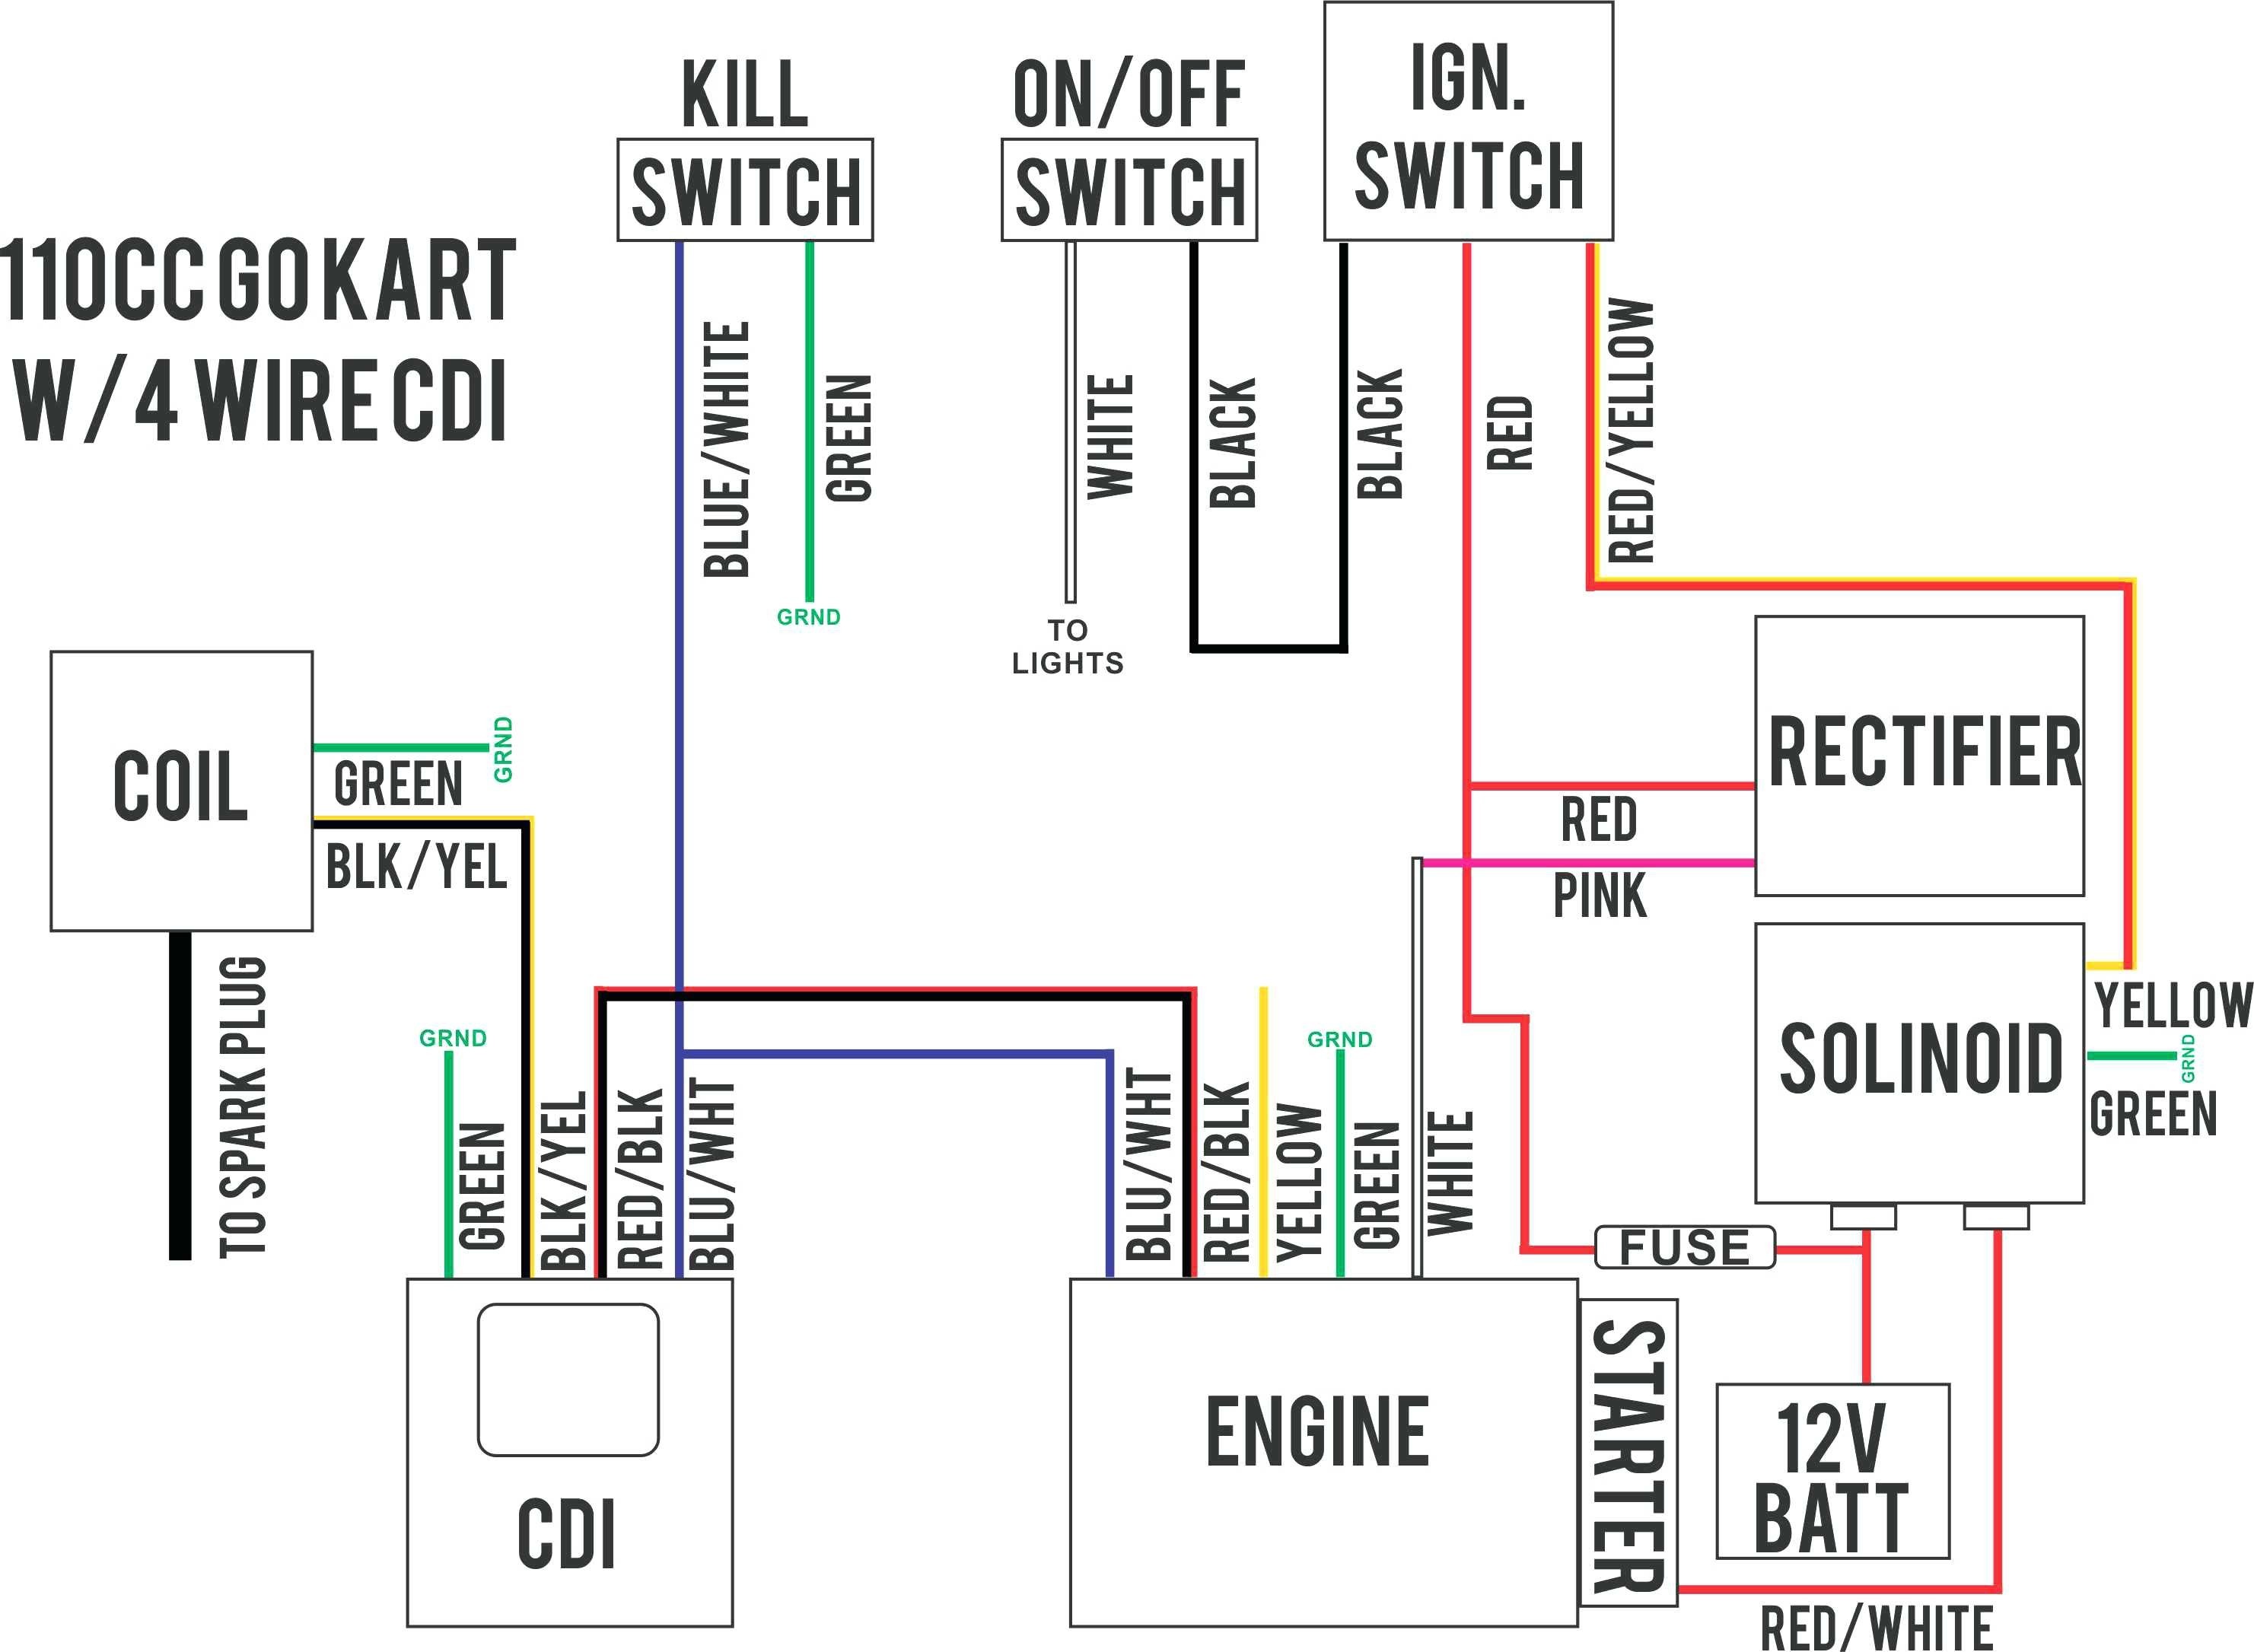 Winch Isolator Switch Wiring Diagram Refrence Warn Winch Switch Wiring Diagram New Narva Winch Rocker Switch